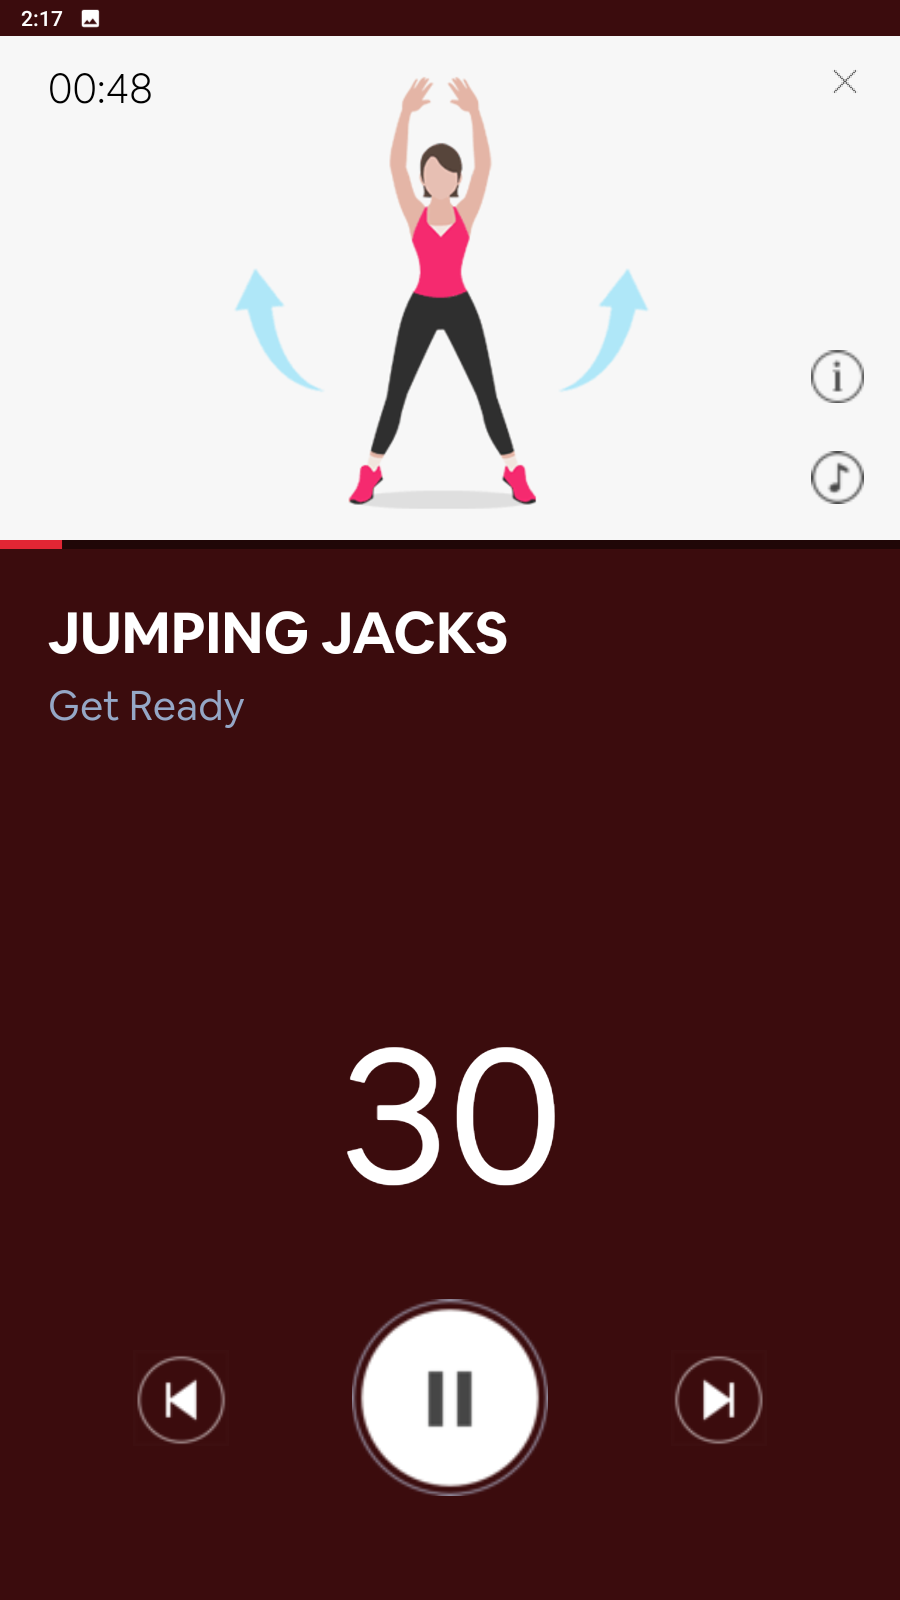 Timer-based workout session in HIIT Workouts app